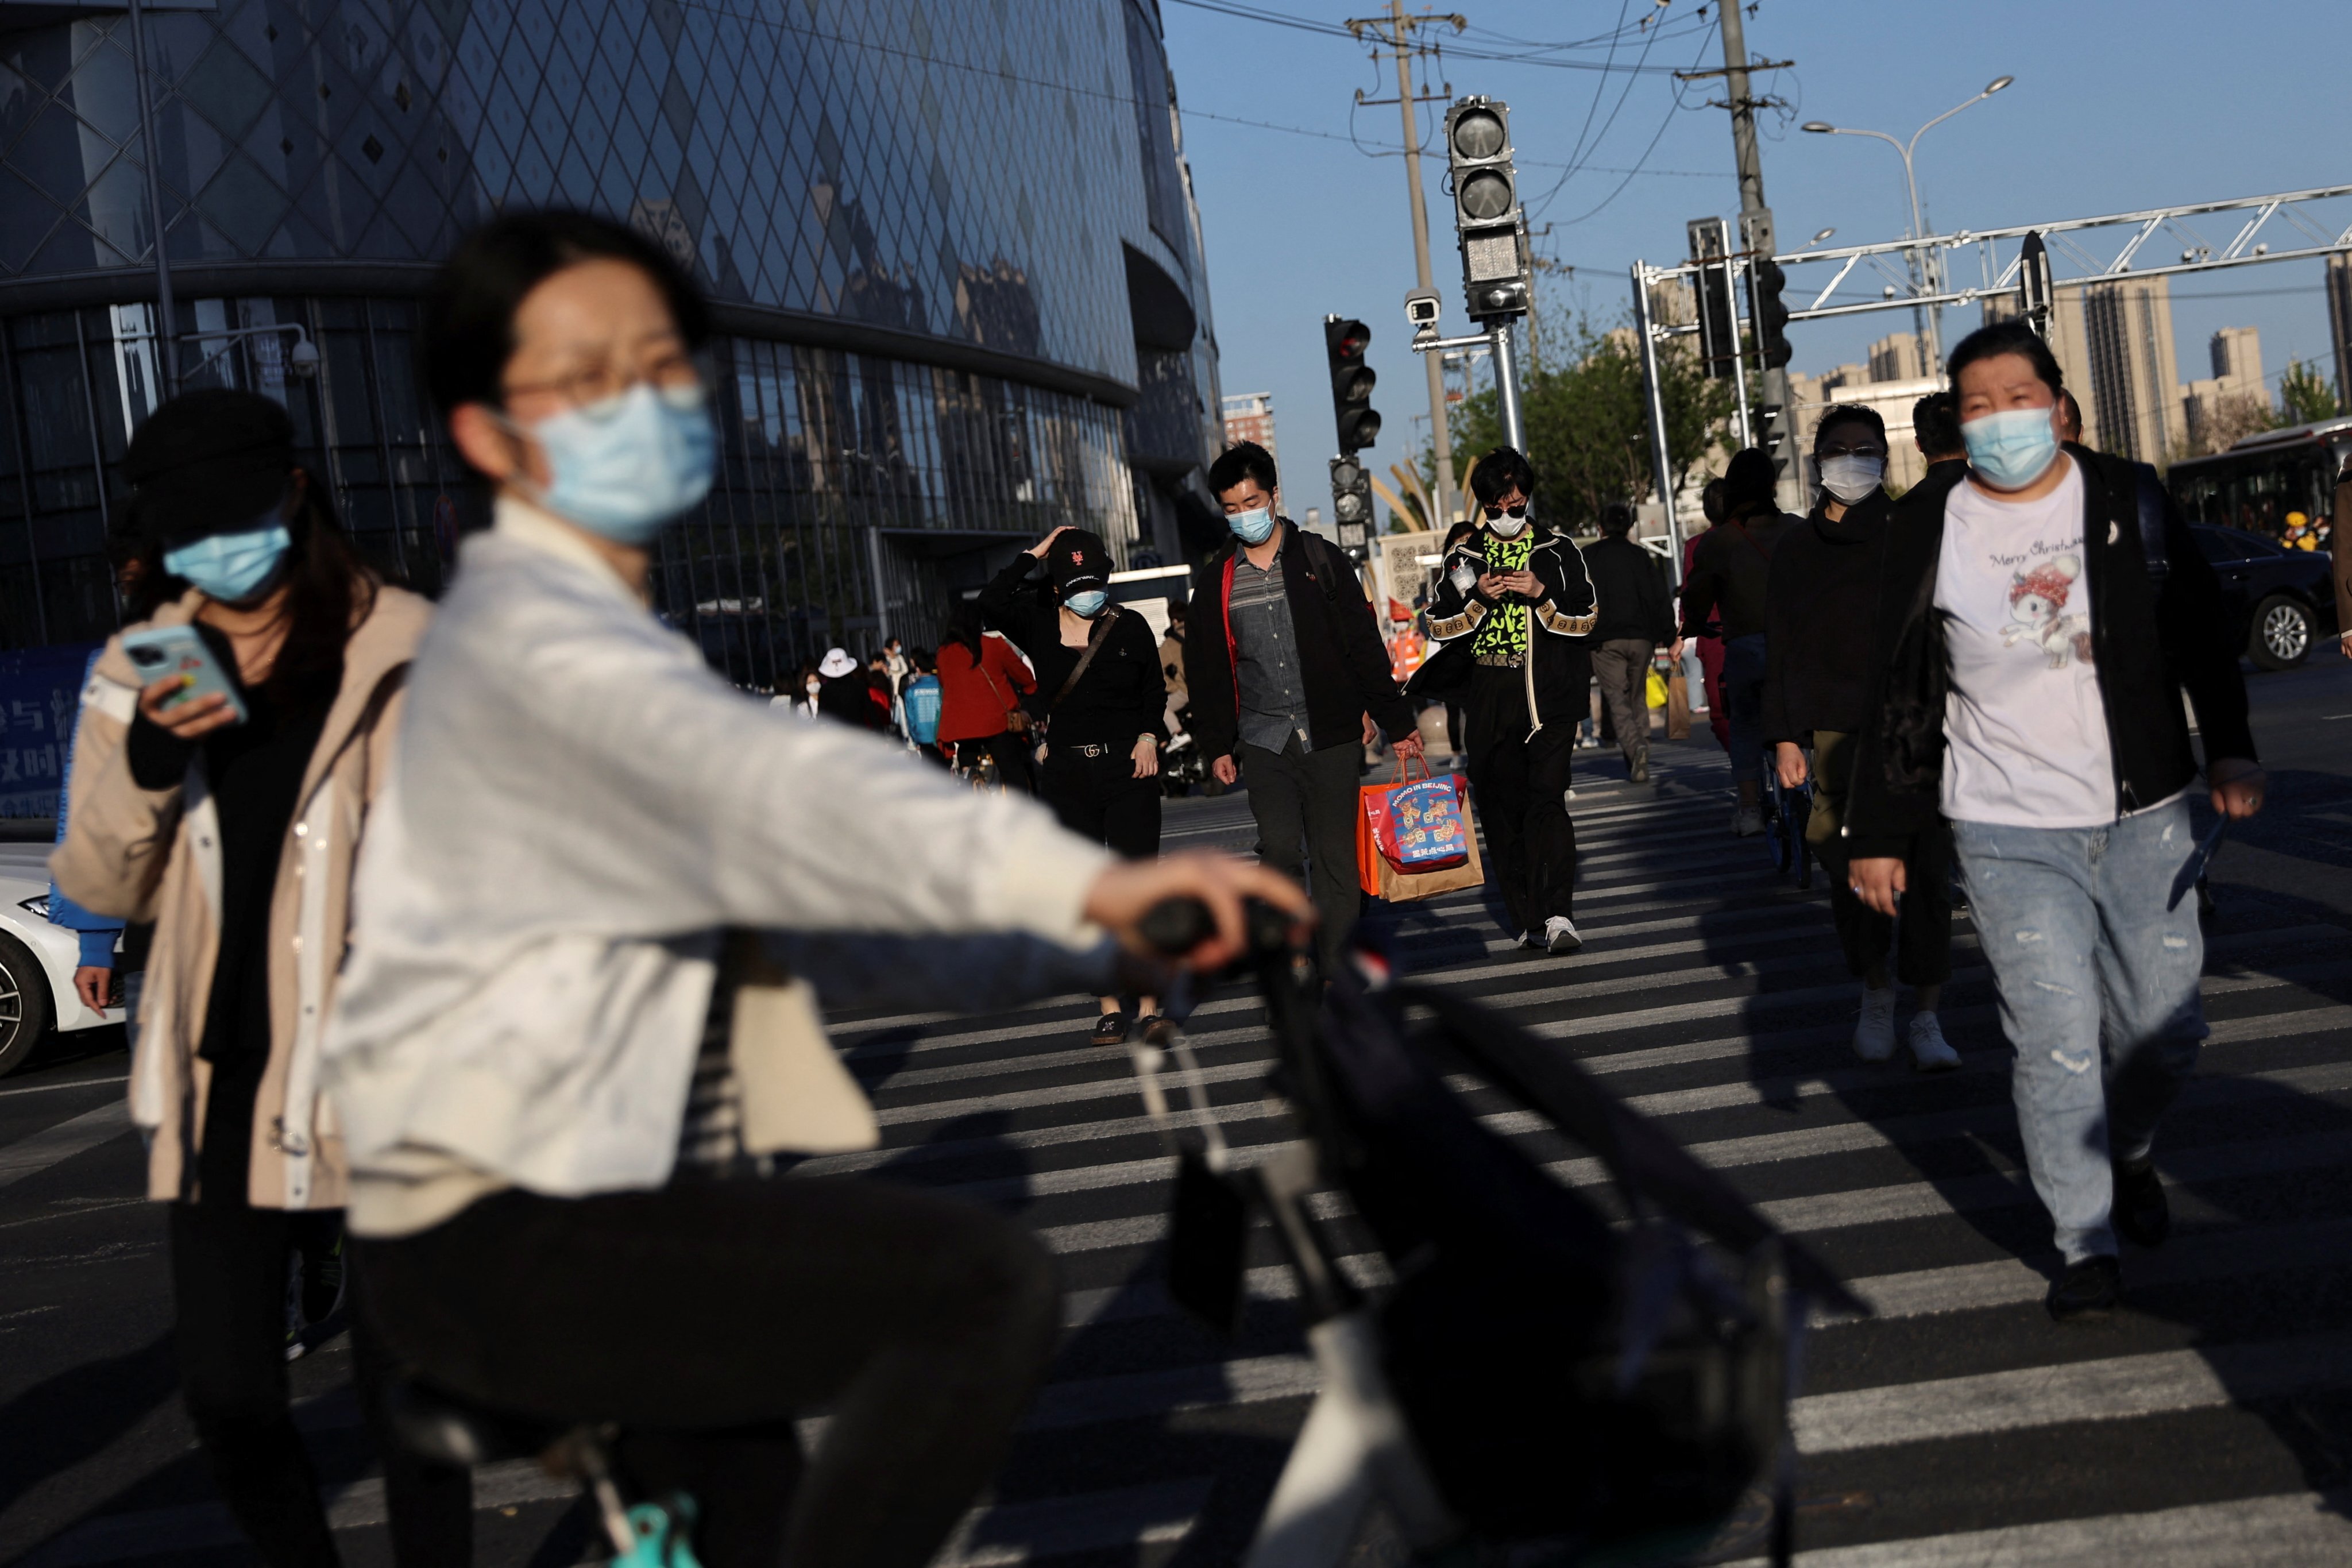 People wearing face masks to prevent the spread of Covid-19 walk across a street near a shopping mall in Beijing on April 15. Photo: Reuters